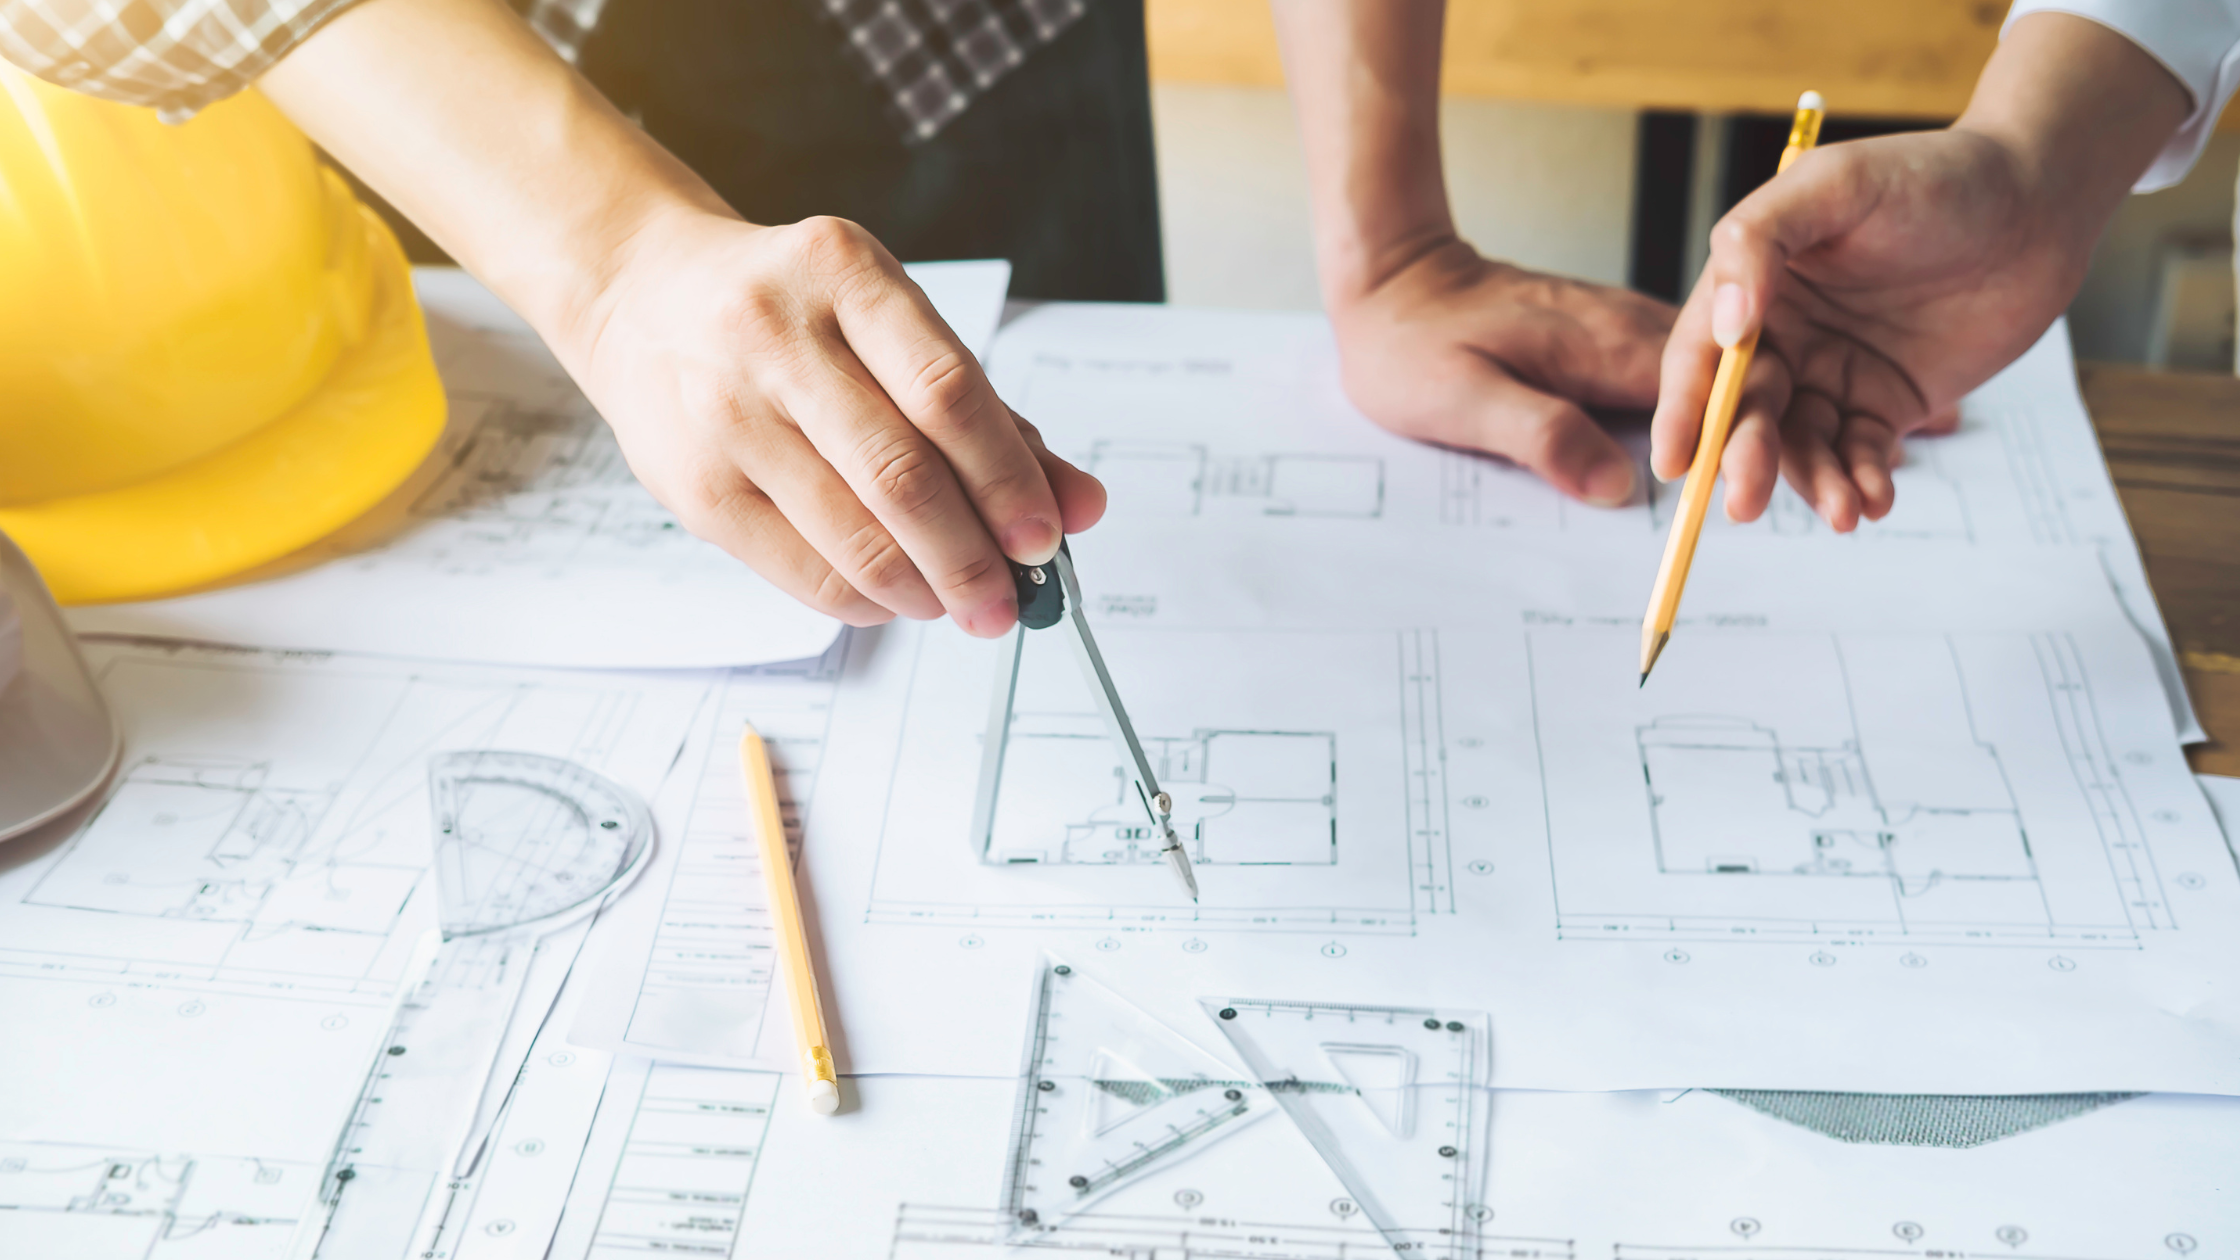 A Step-by-Step Guide to Finding the Best Home Building Team